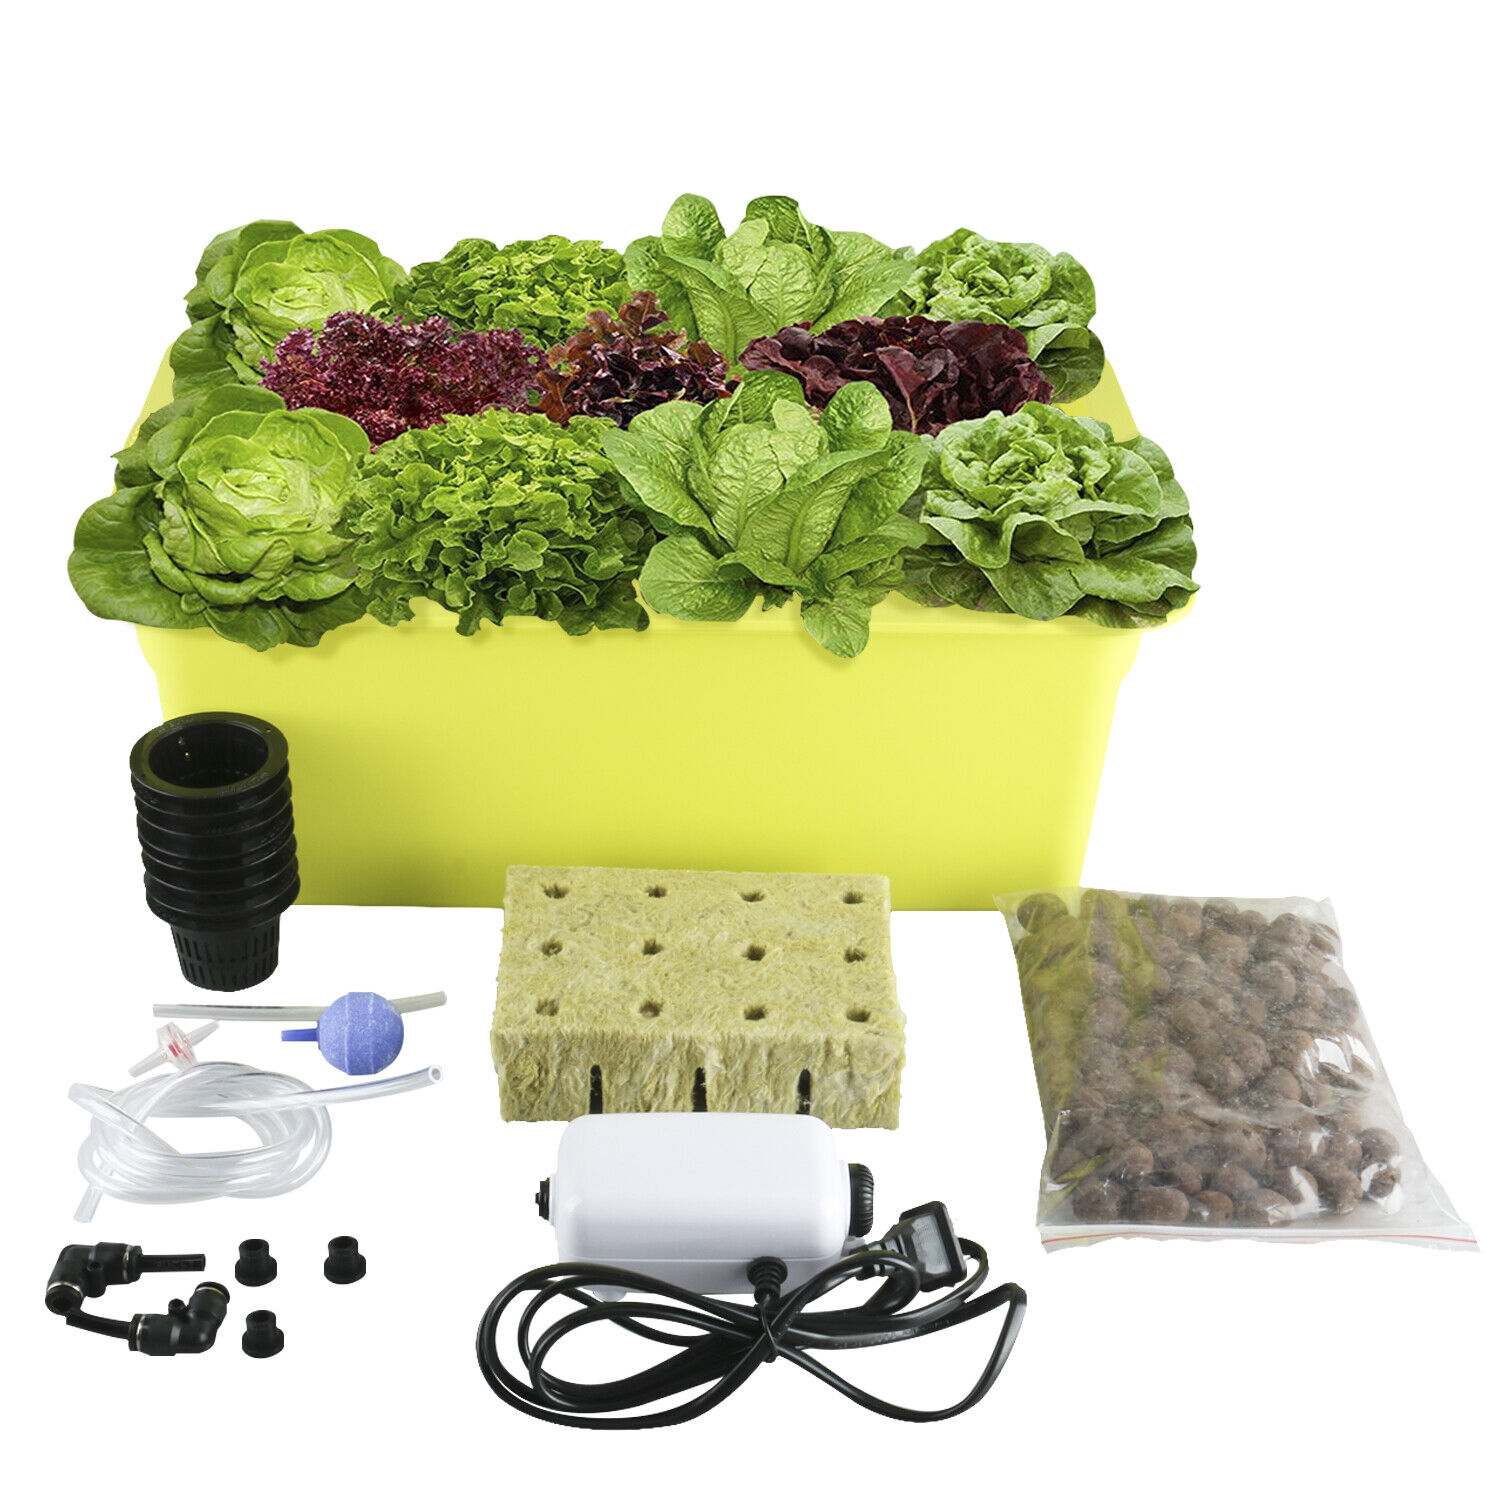 6 Holes Plant Site Hydroponic System Grow Kit,Best Indoor Herb Garden W/ Manual